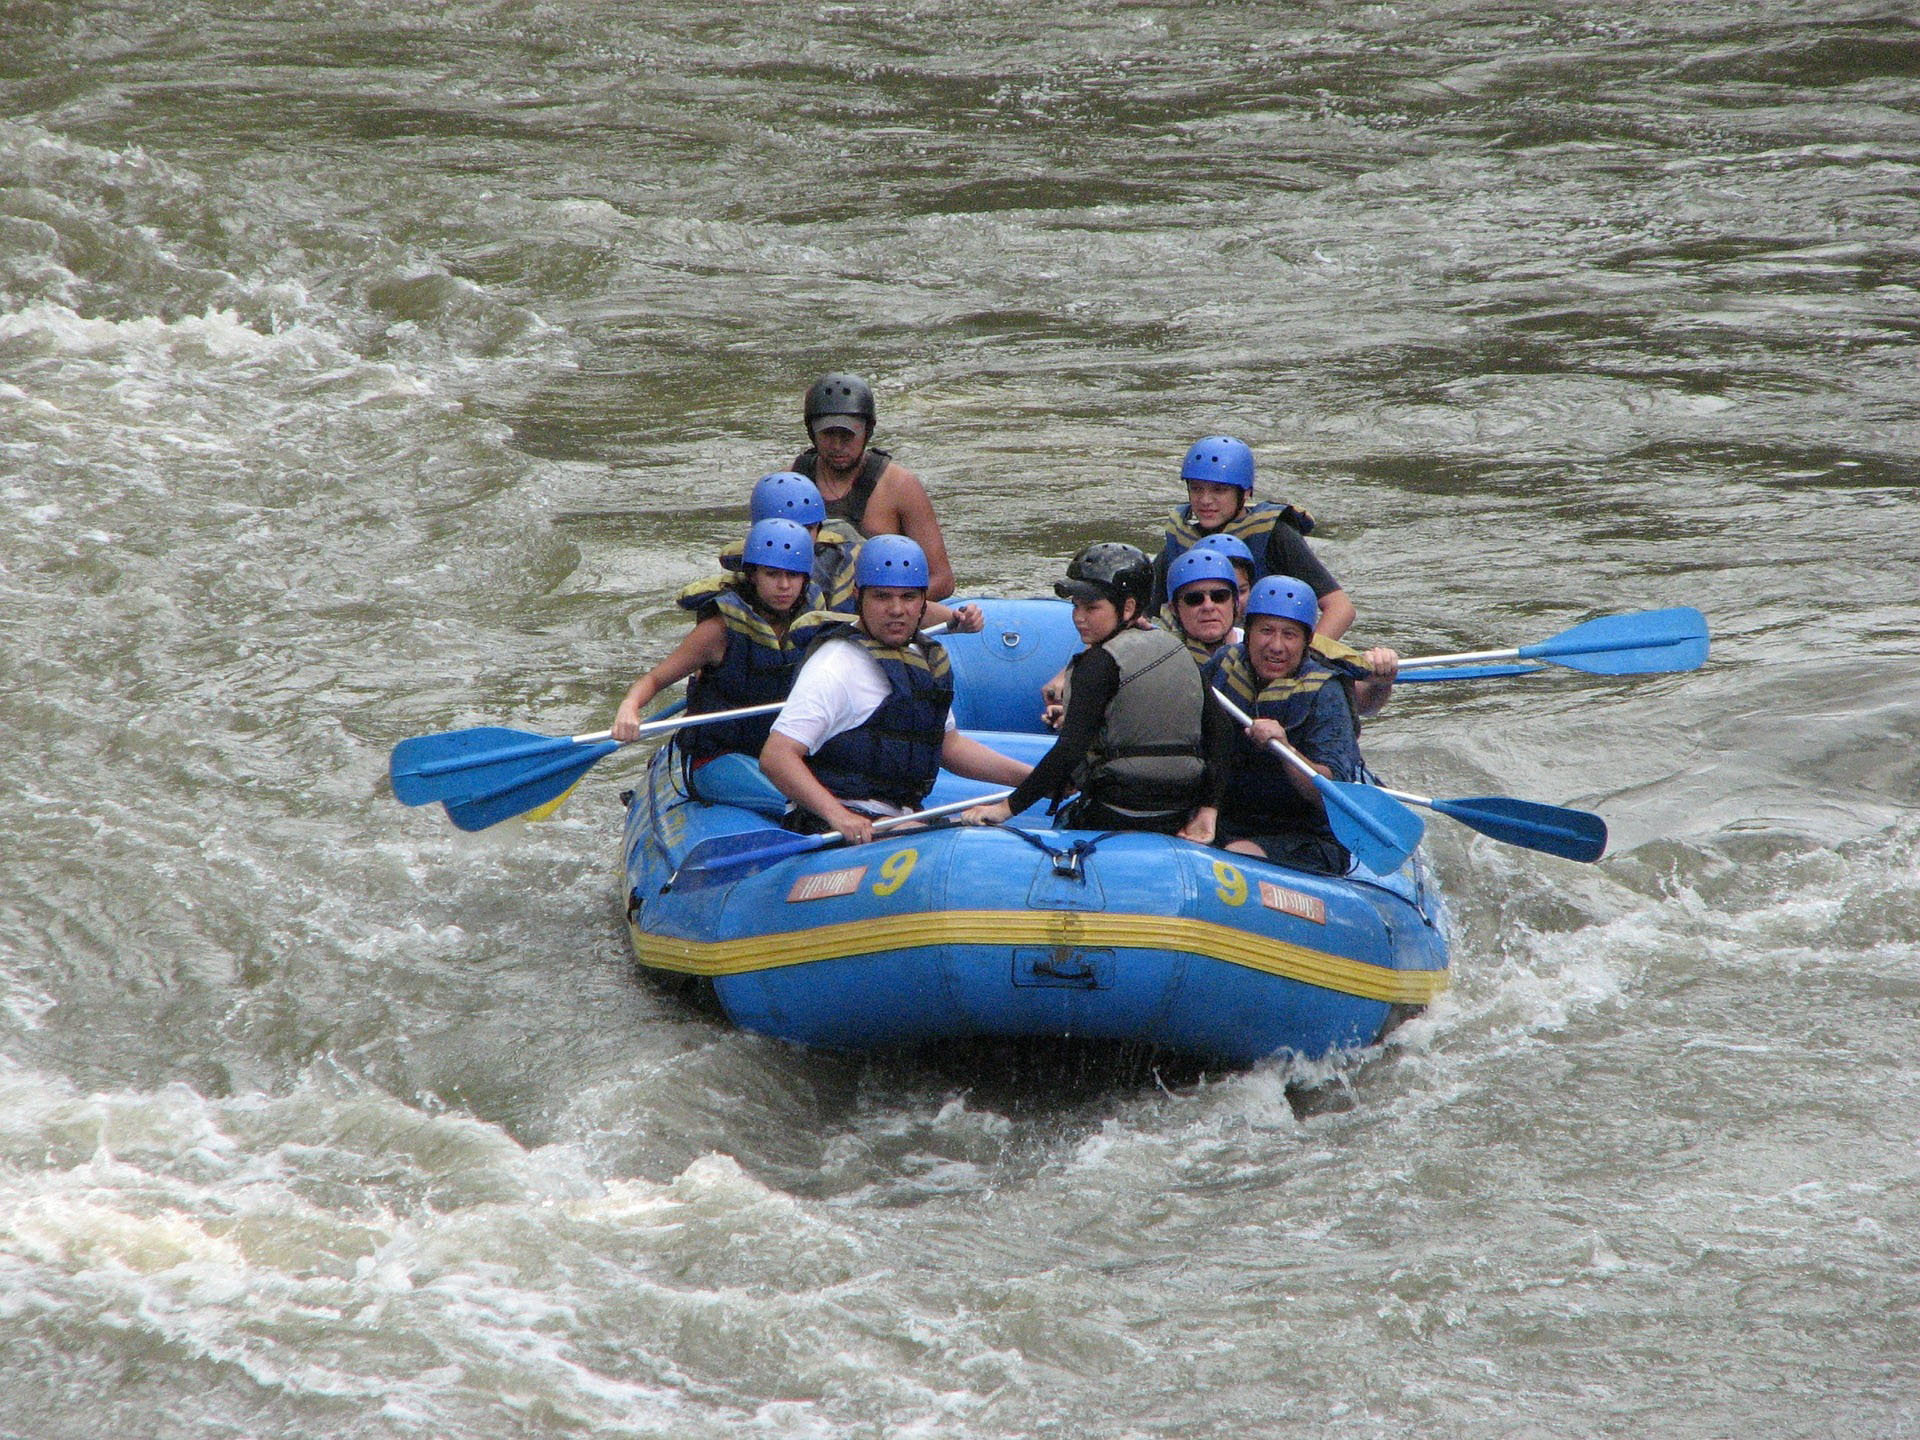 River Rafters